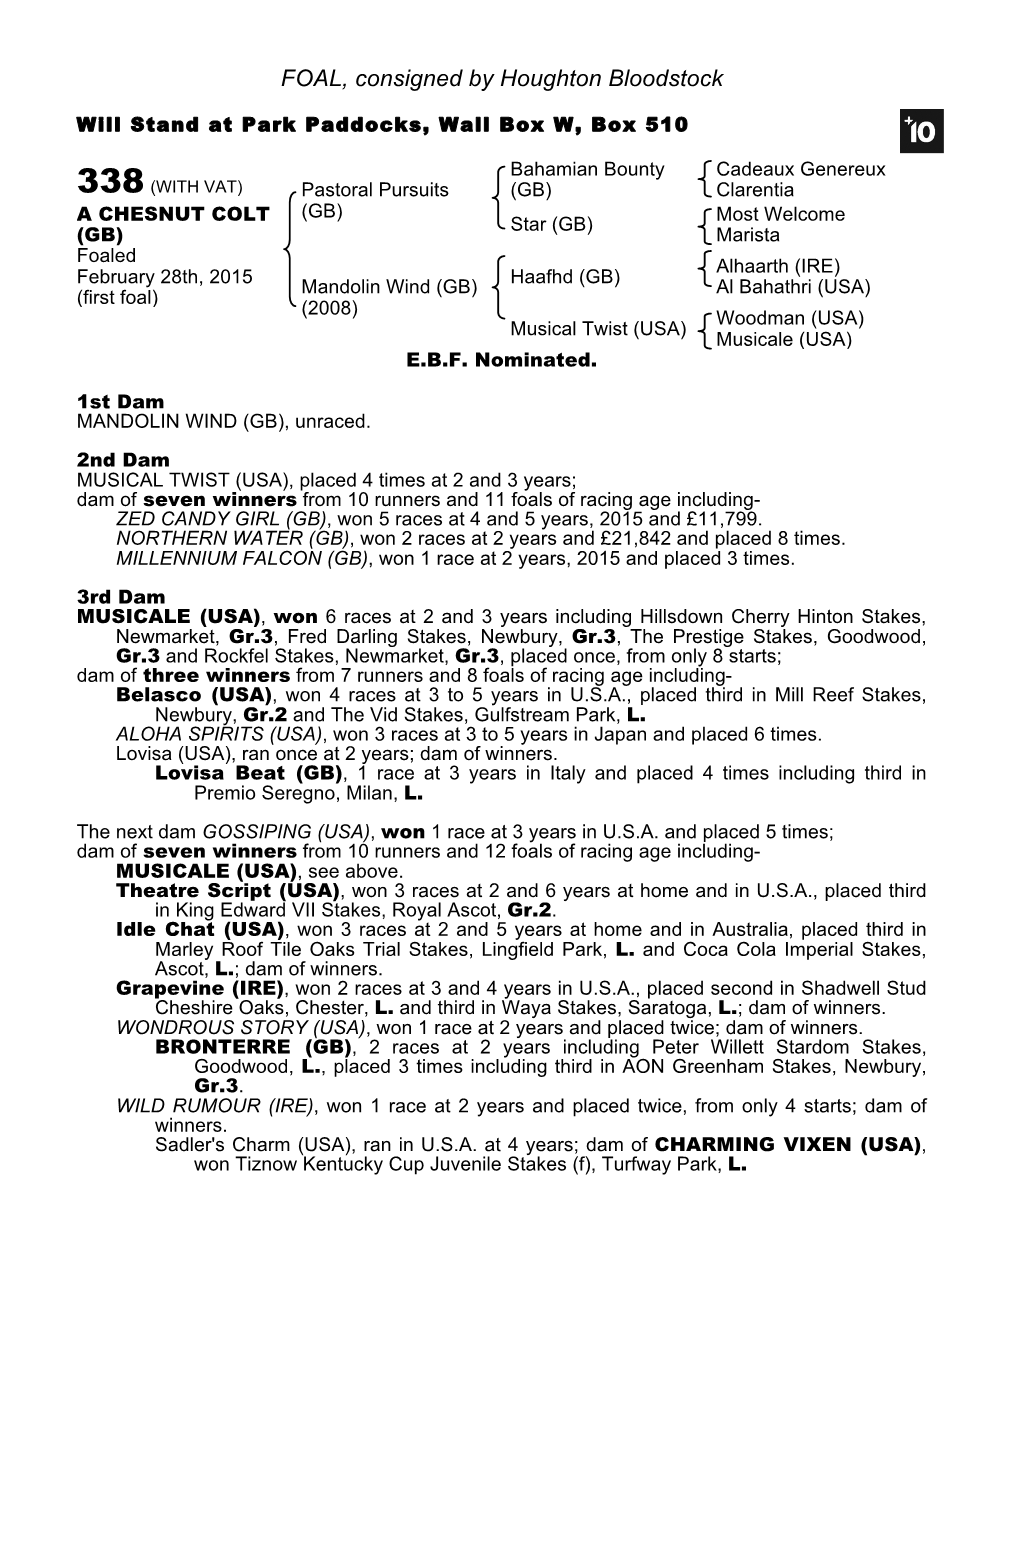 FOAL, Consigned by Houghton Bloodstock